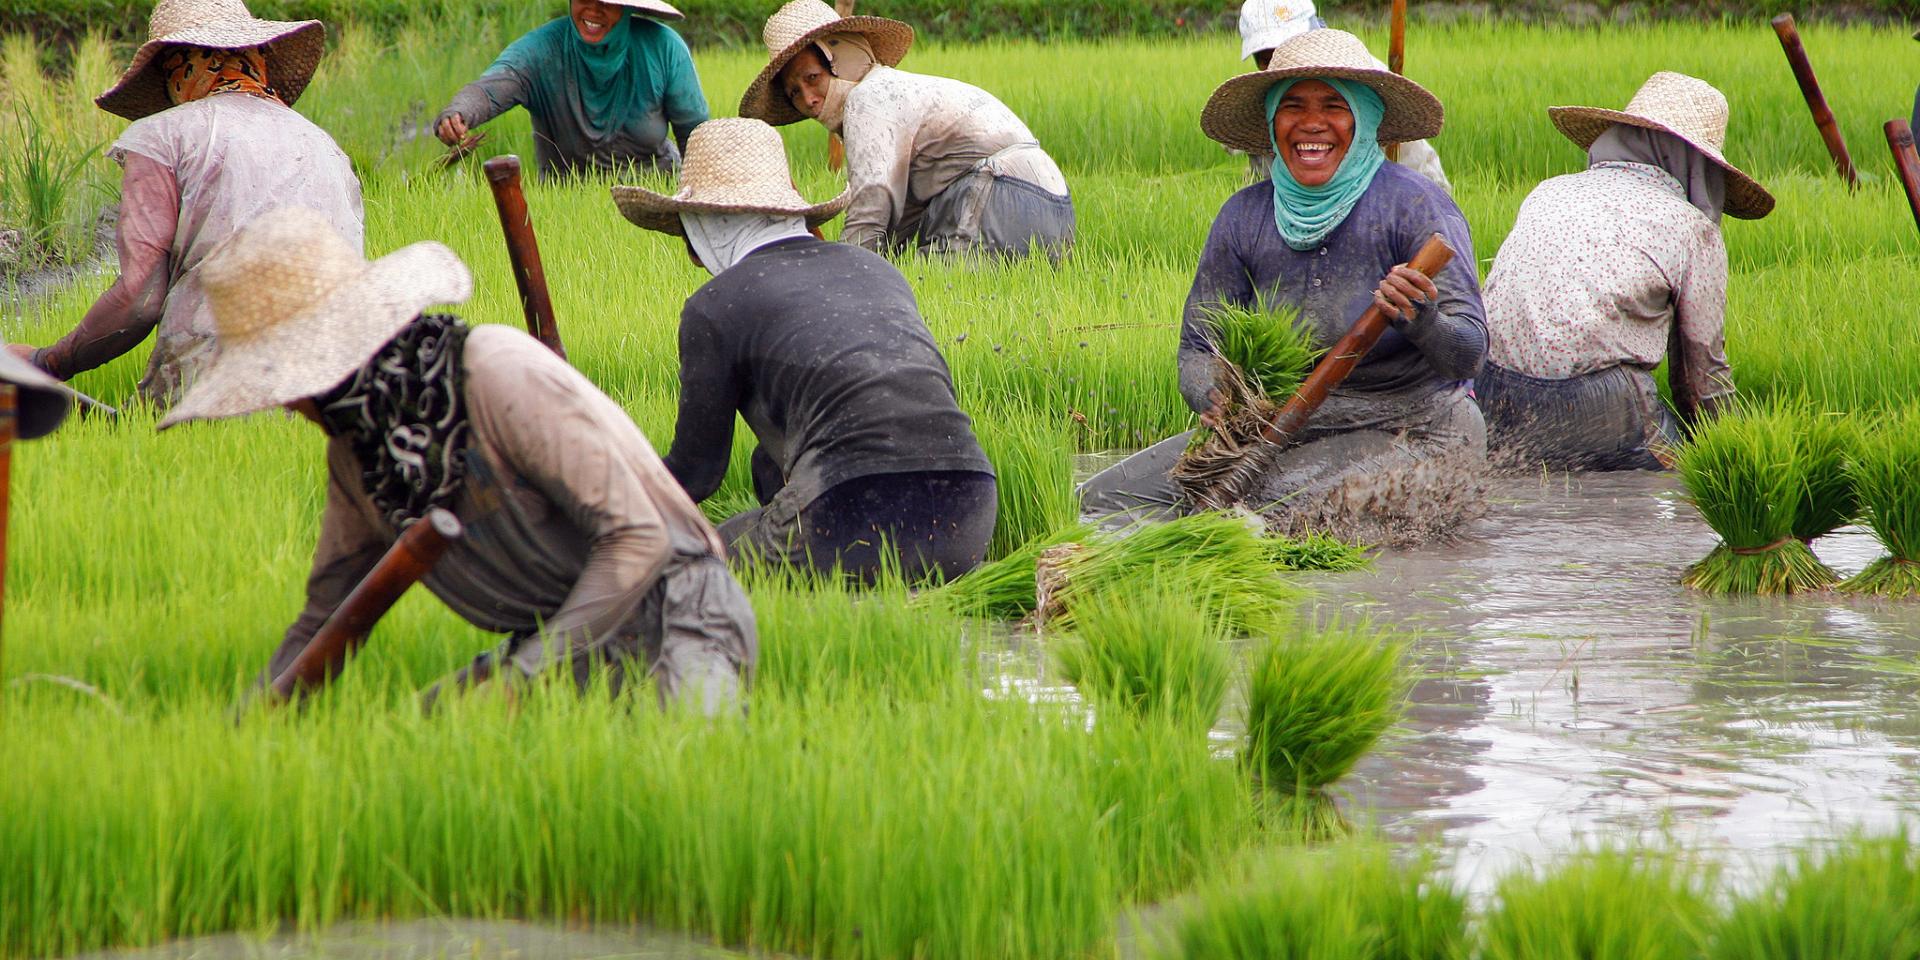 Rice harvest in the Philippines.